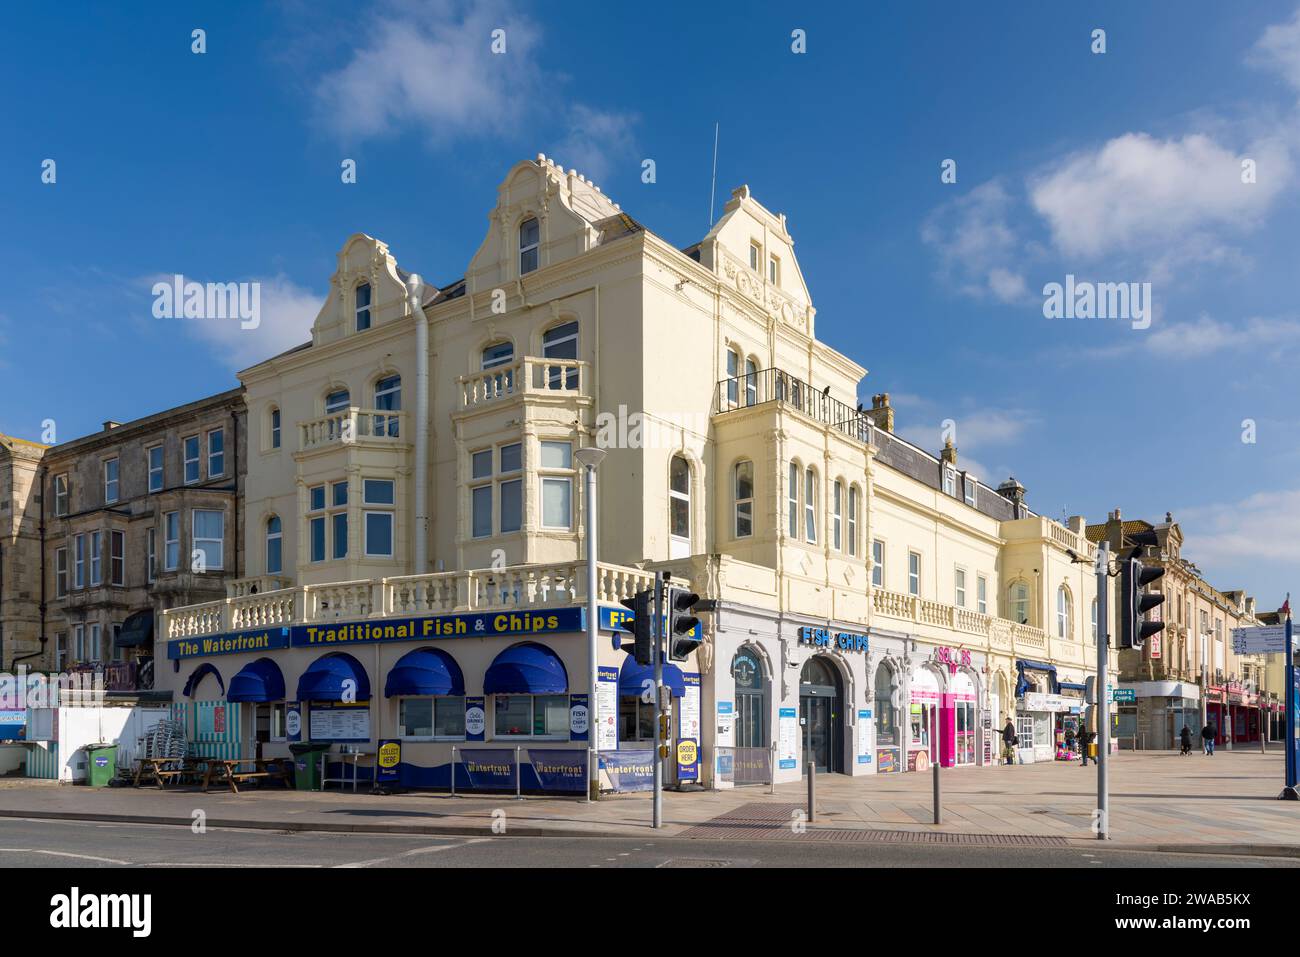 The Waterfront Fish Bar on the seafront of the seaside town of Weston-super-Mare, North Somerset, England. Stock Photo